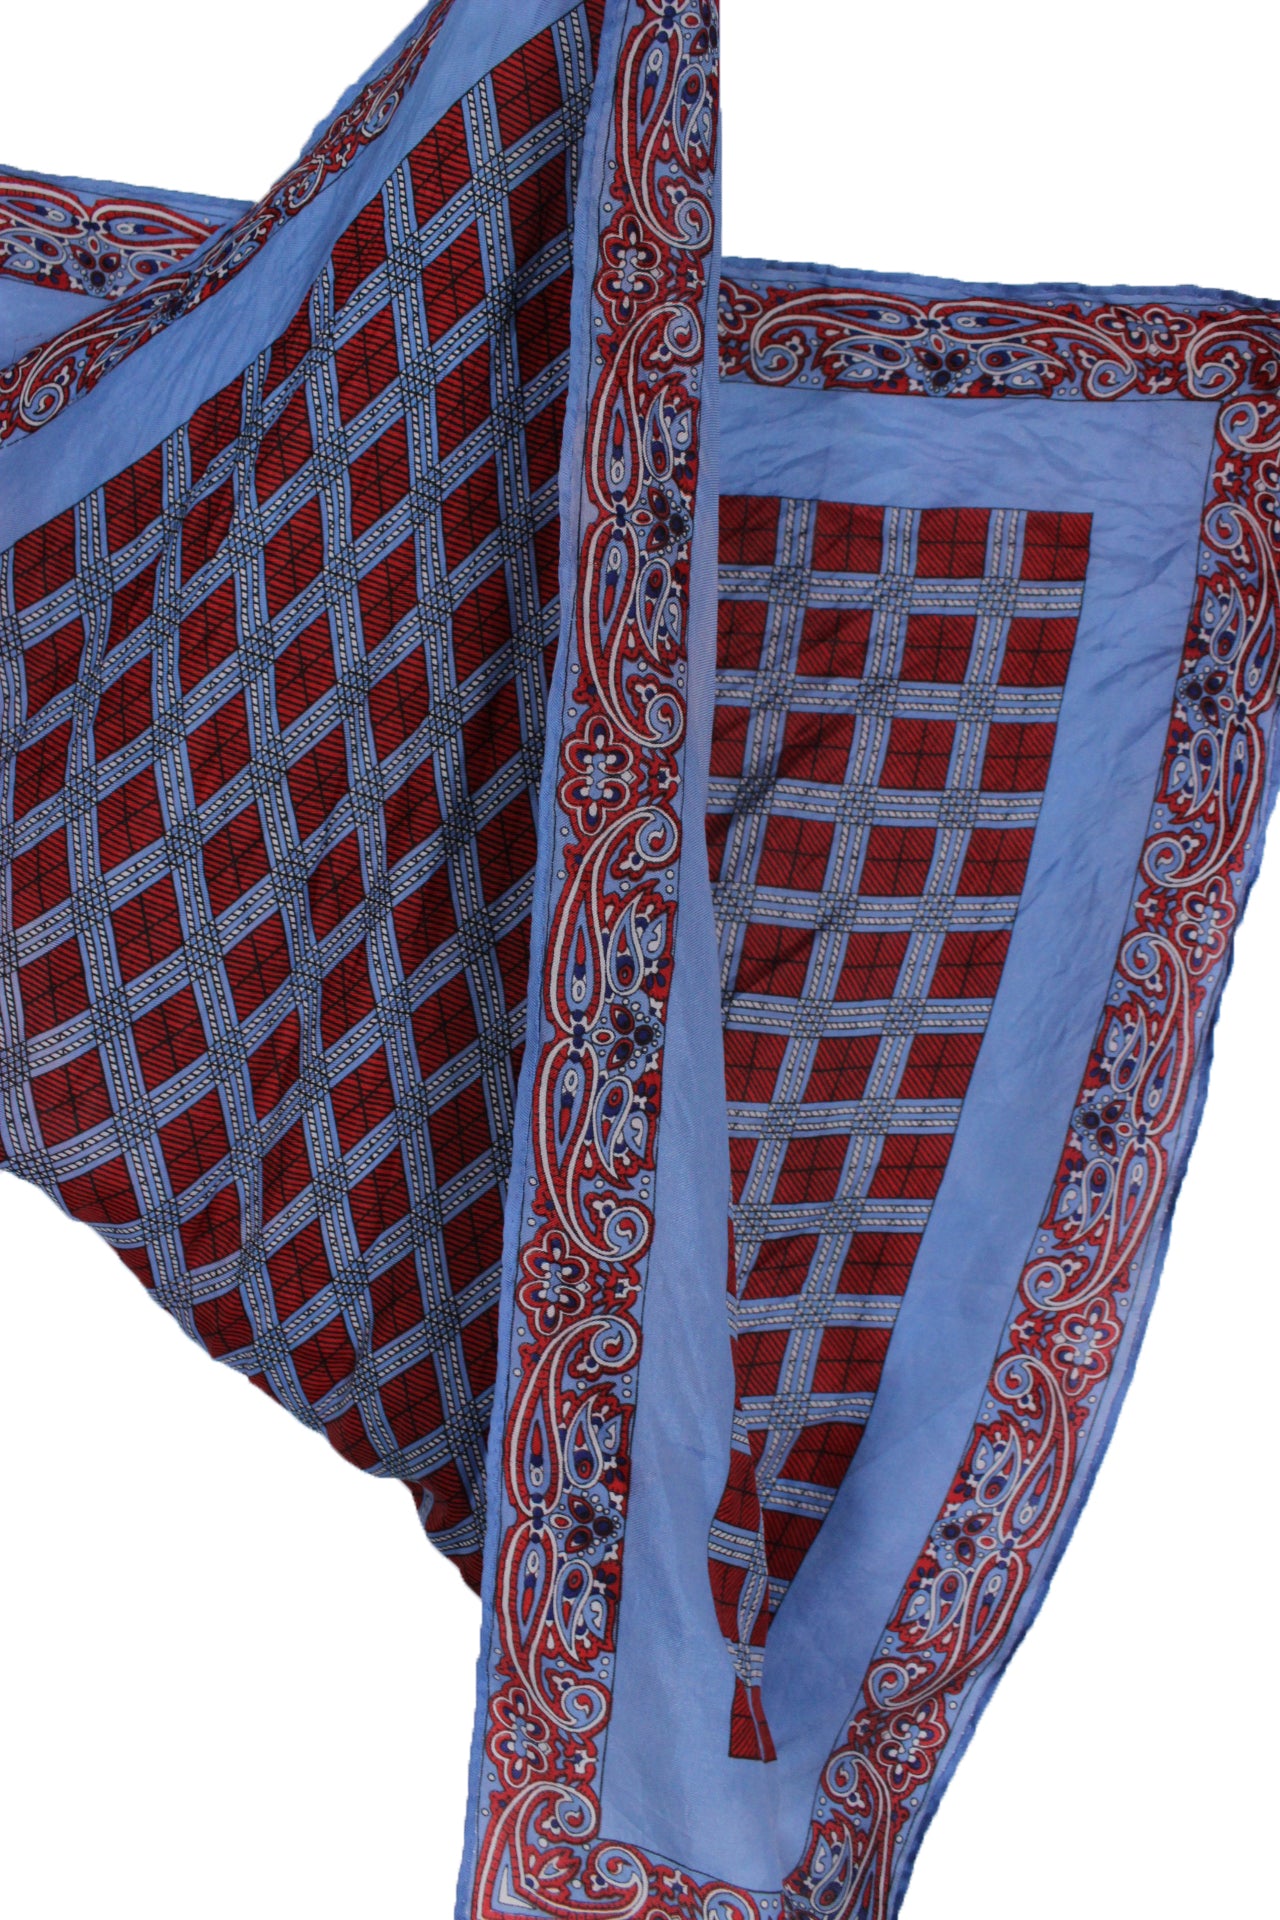 detail of prints of scarf. 